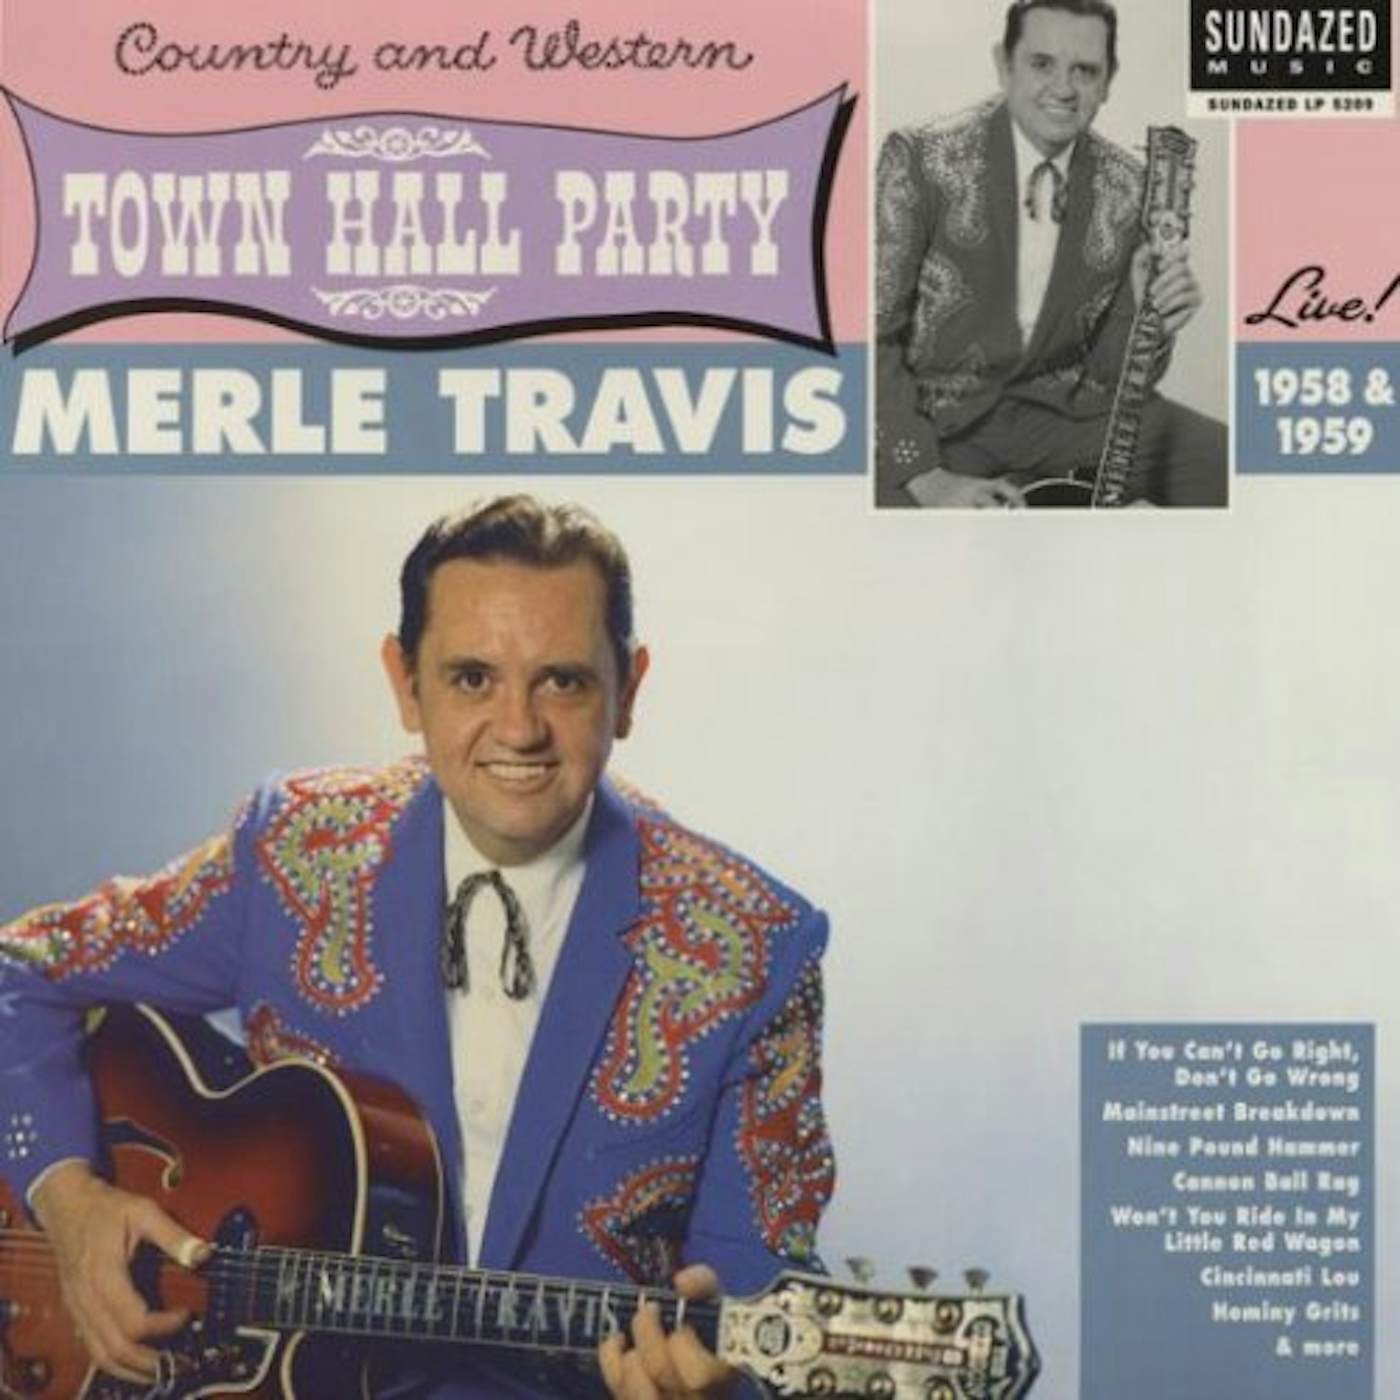 Merle Travis LIVE AT TOWN HALL PARTY 1958 & 1959 Vinyl Record